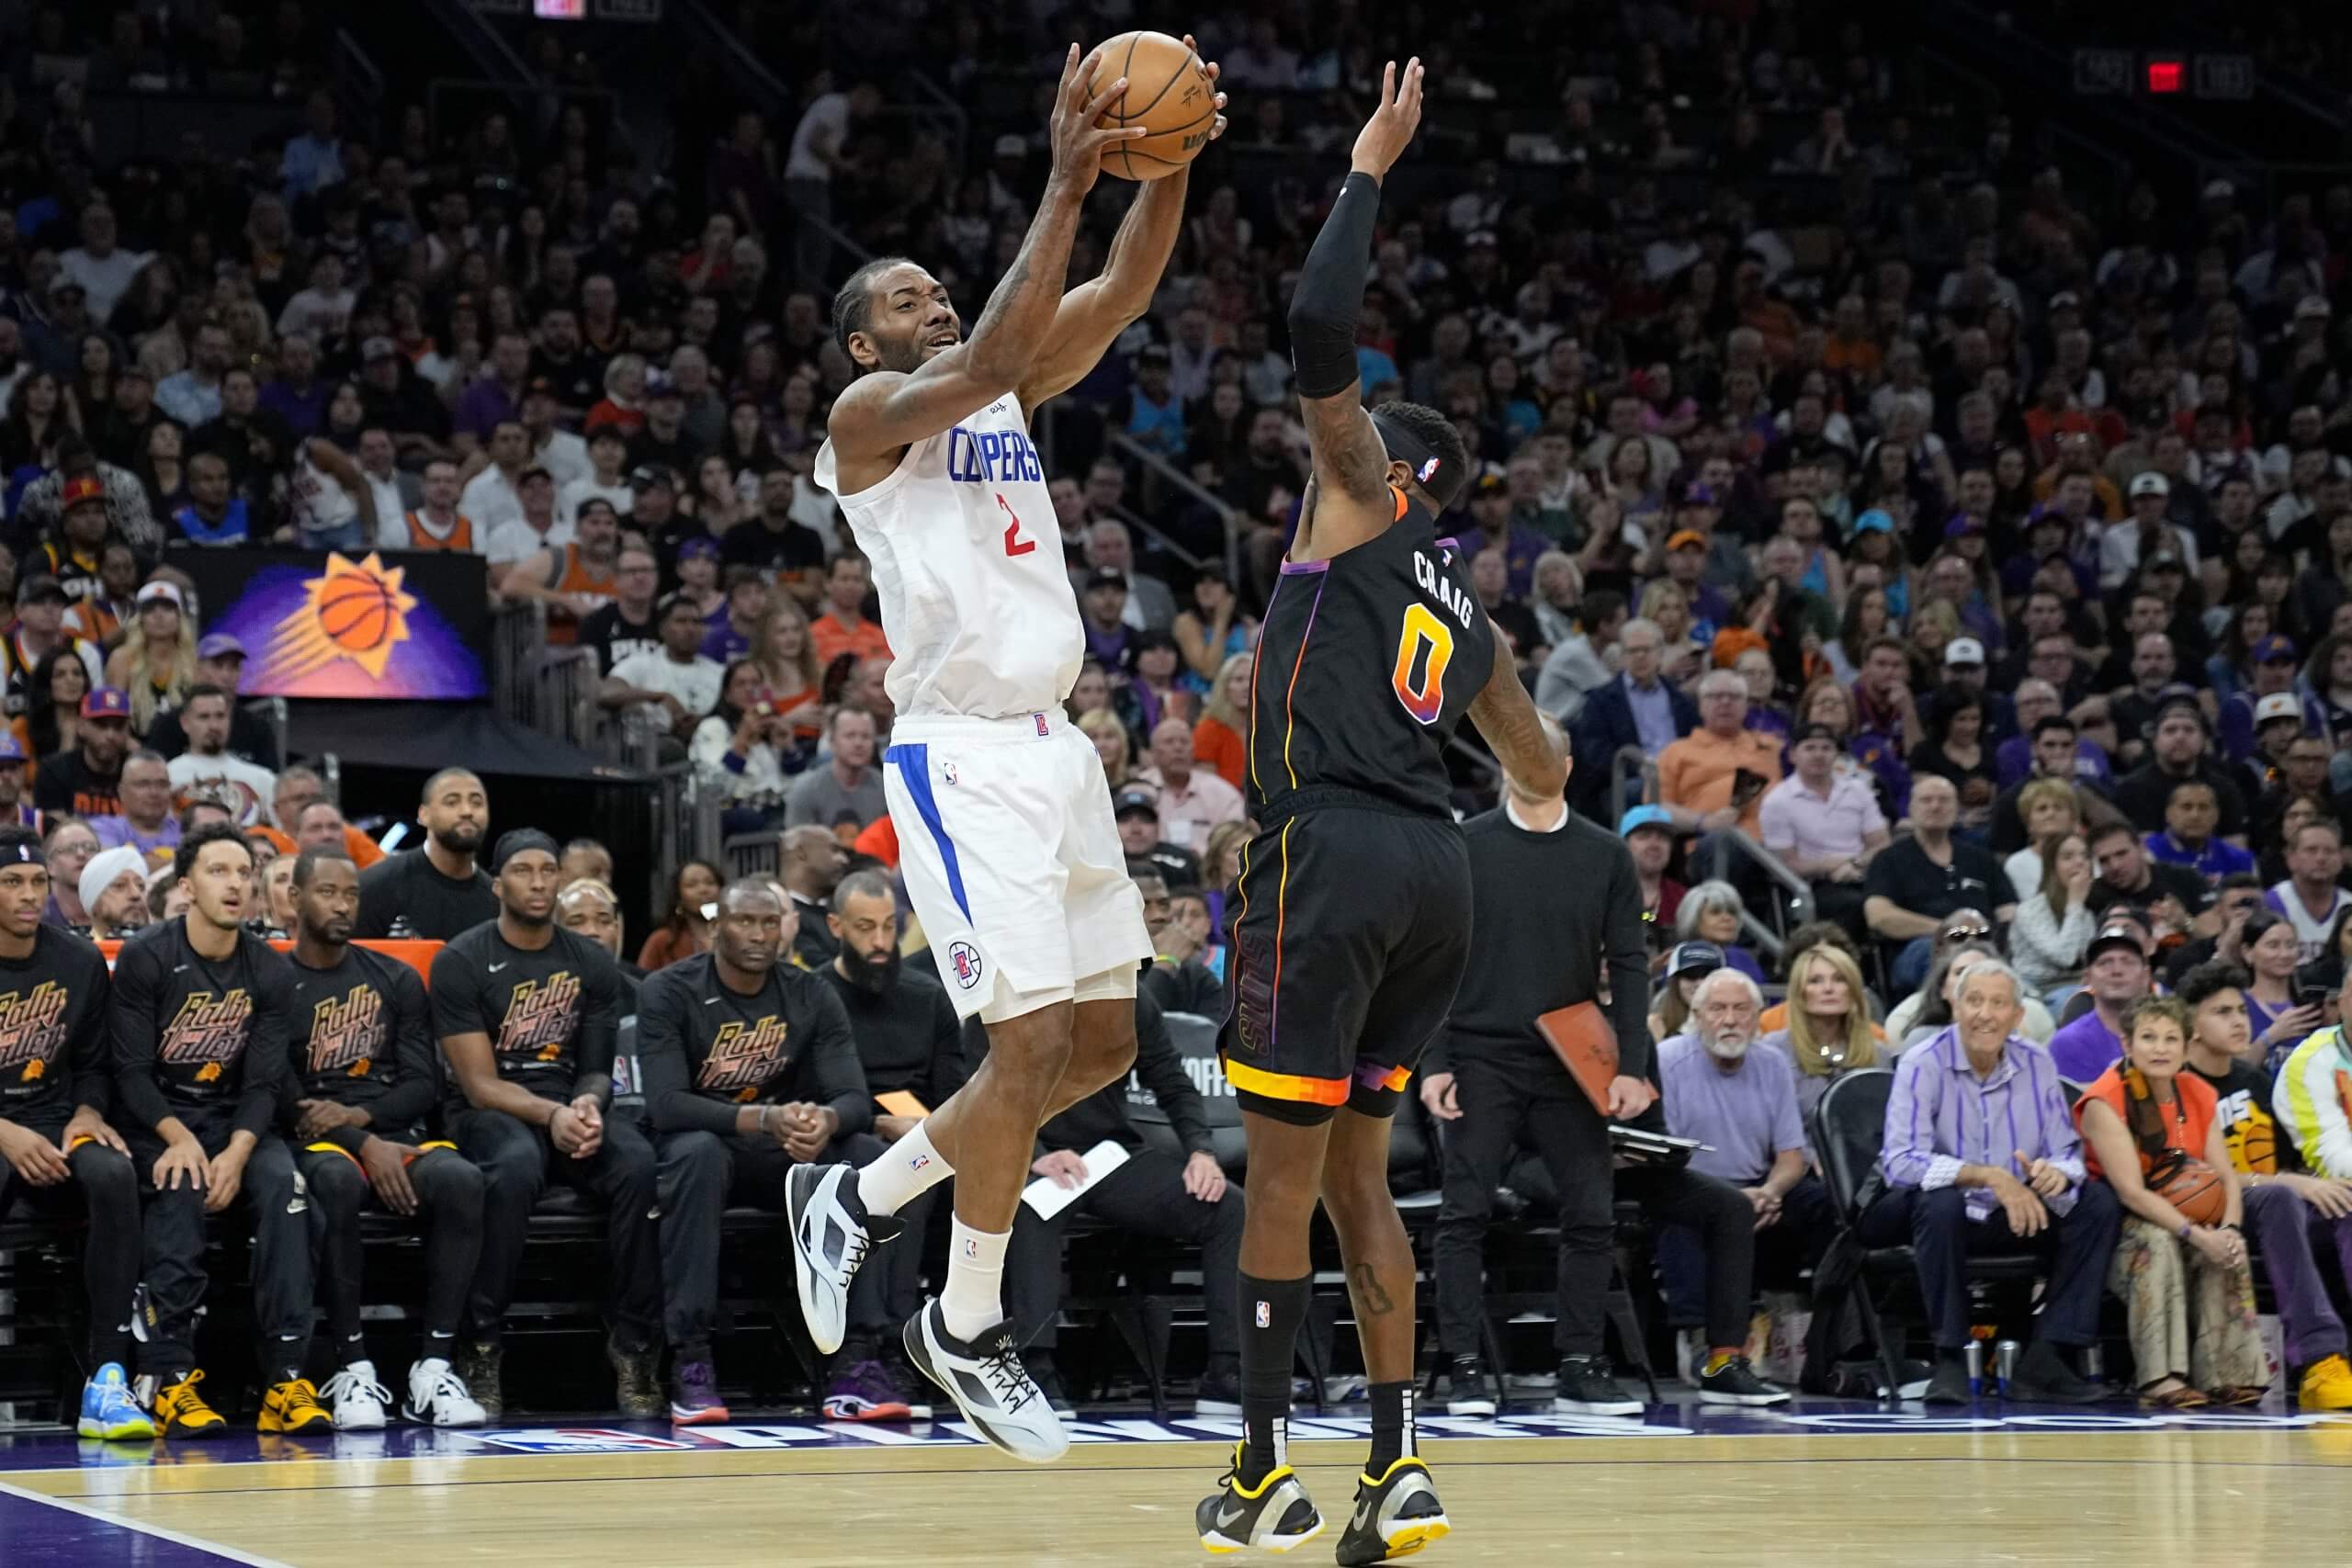 Phoenix Suns - Los Angeles Clippers